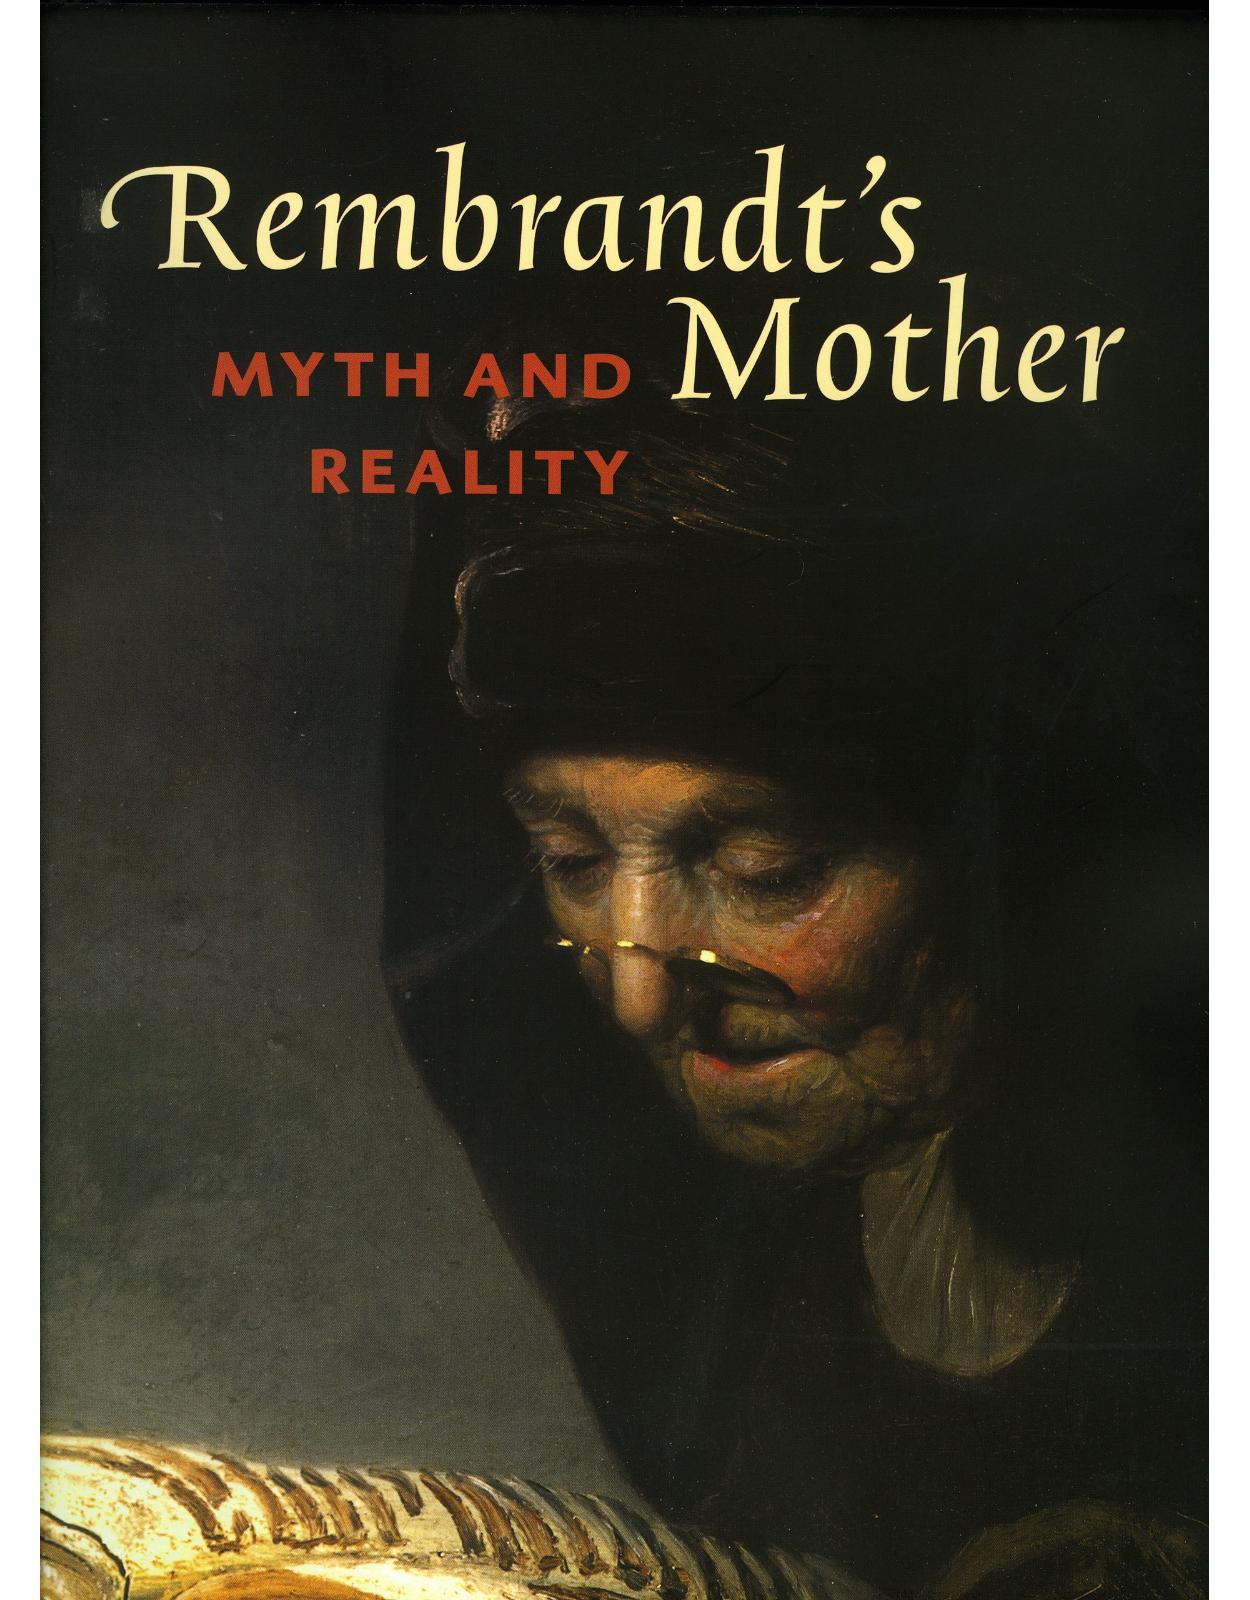 Rembrandt's Mother: Myth and Reality (Art)